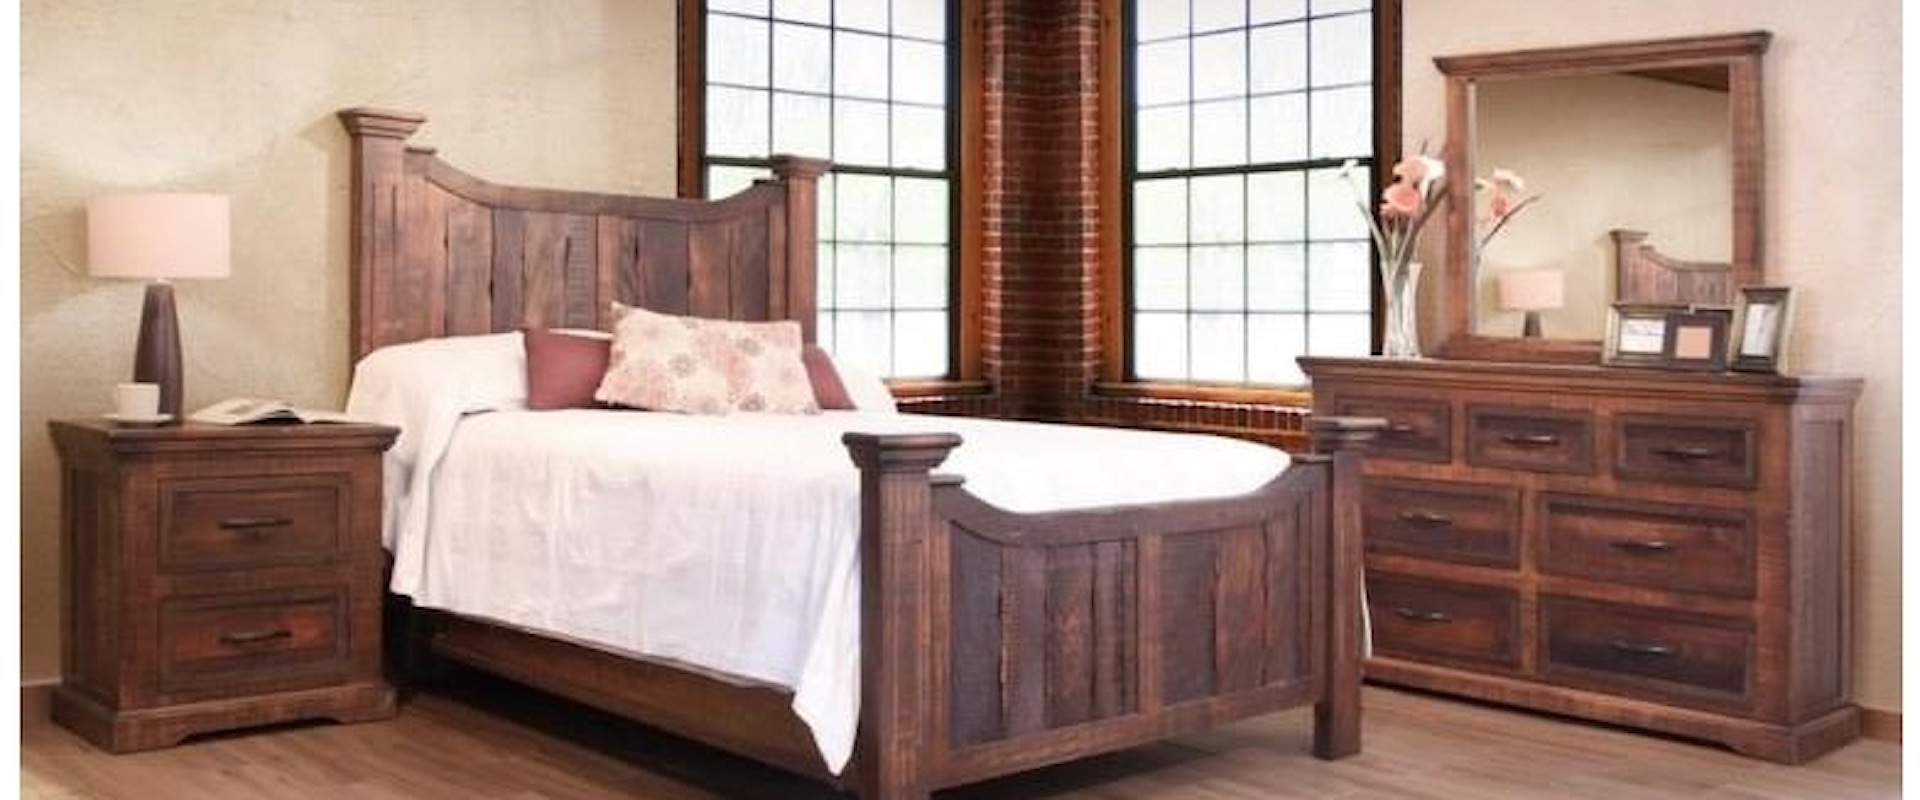 King Panel Bed, Dresser, Mirror, Nightstand and Chest Package